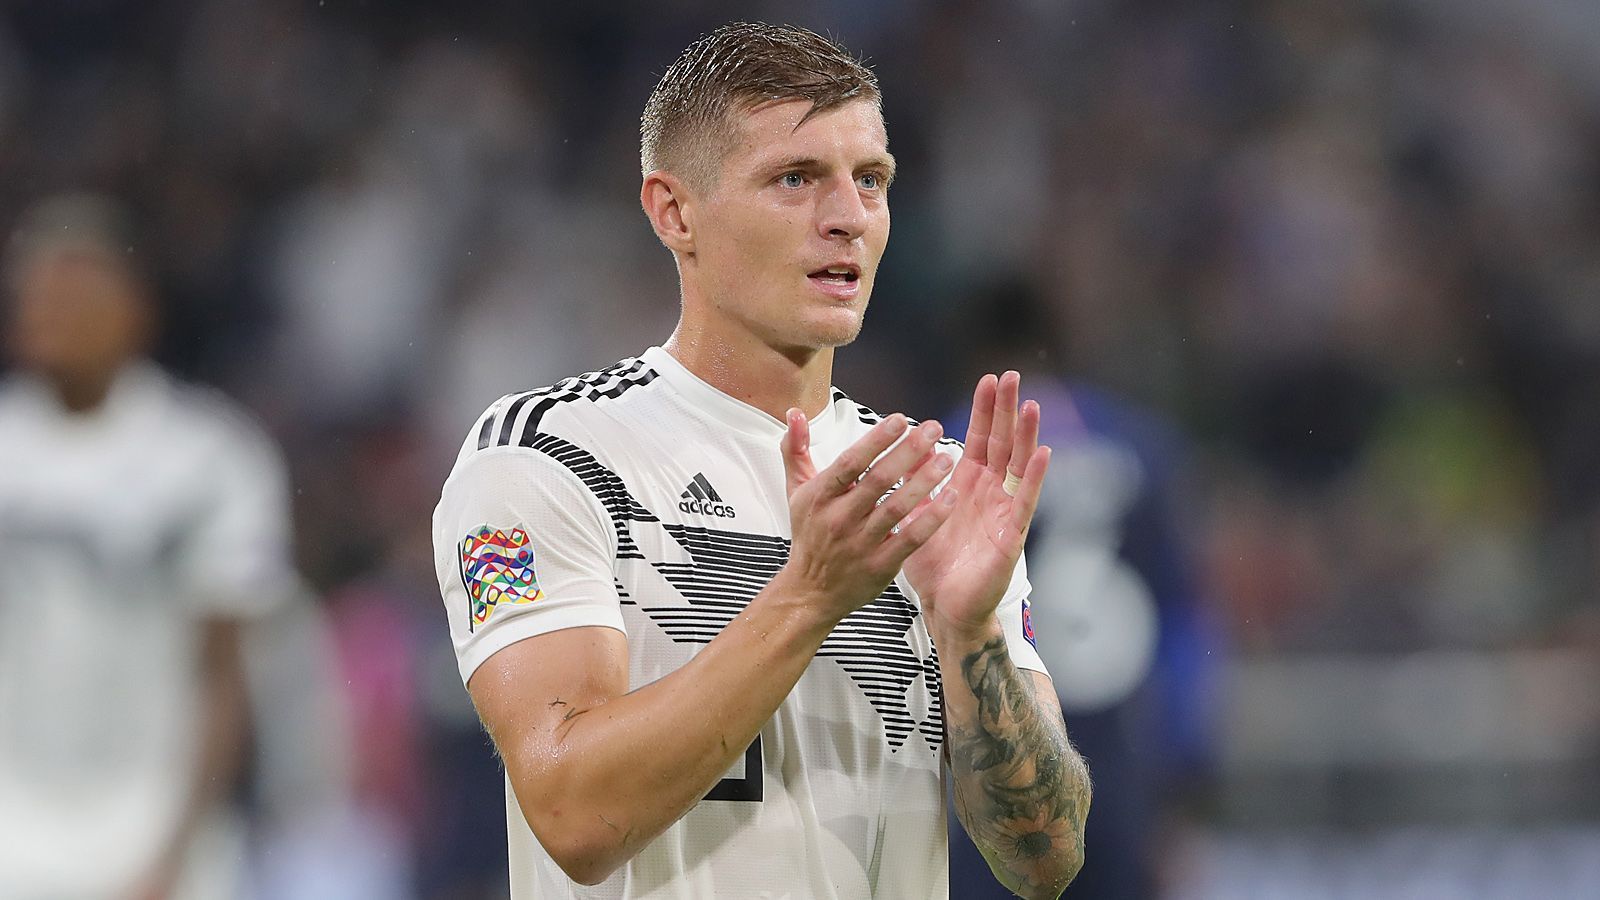 
                <strong>Toni Kroos</strong><br>
                &#x2022; Position: Mittelfeld/Angriff -<br>&#x2022; Alter: 31 Jahre -<br>&#x2022; Verein: Real Madrid<br>
              